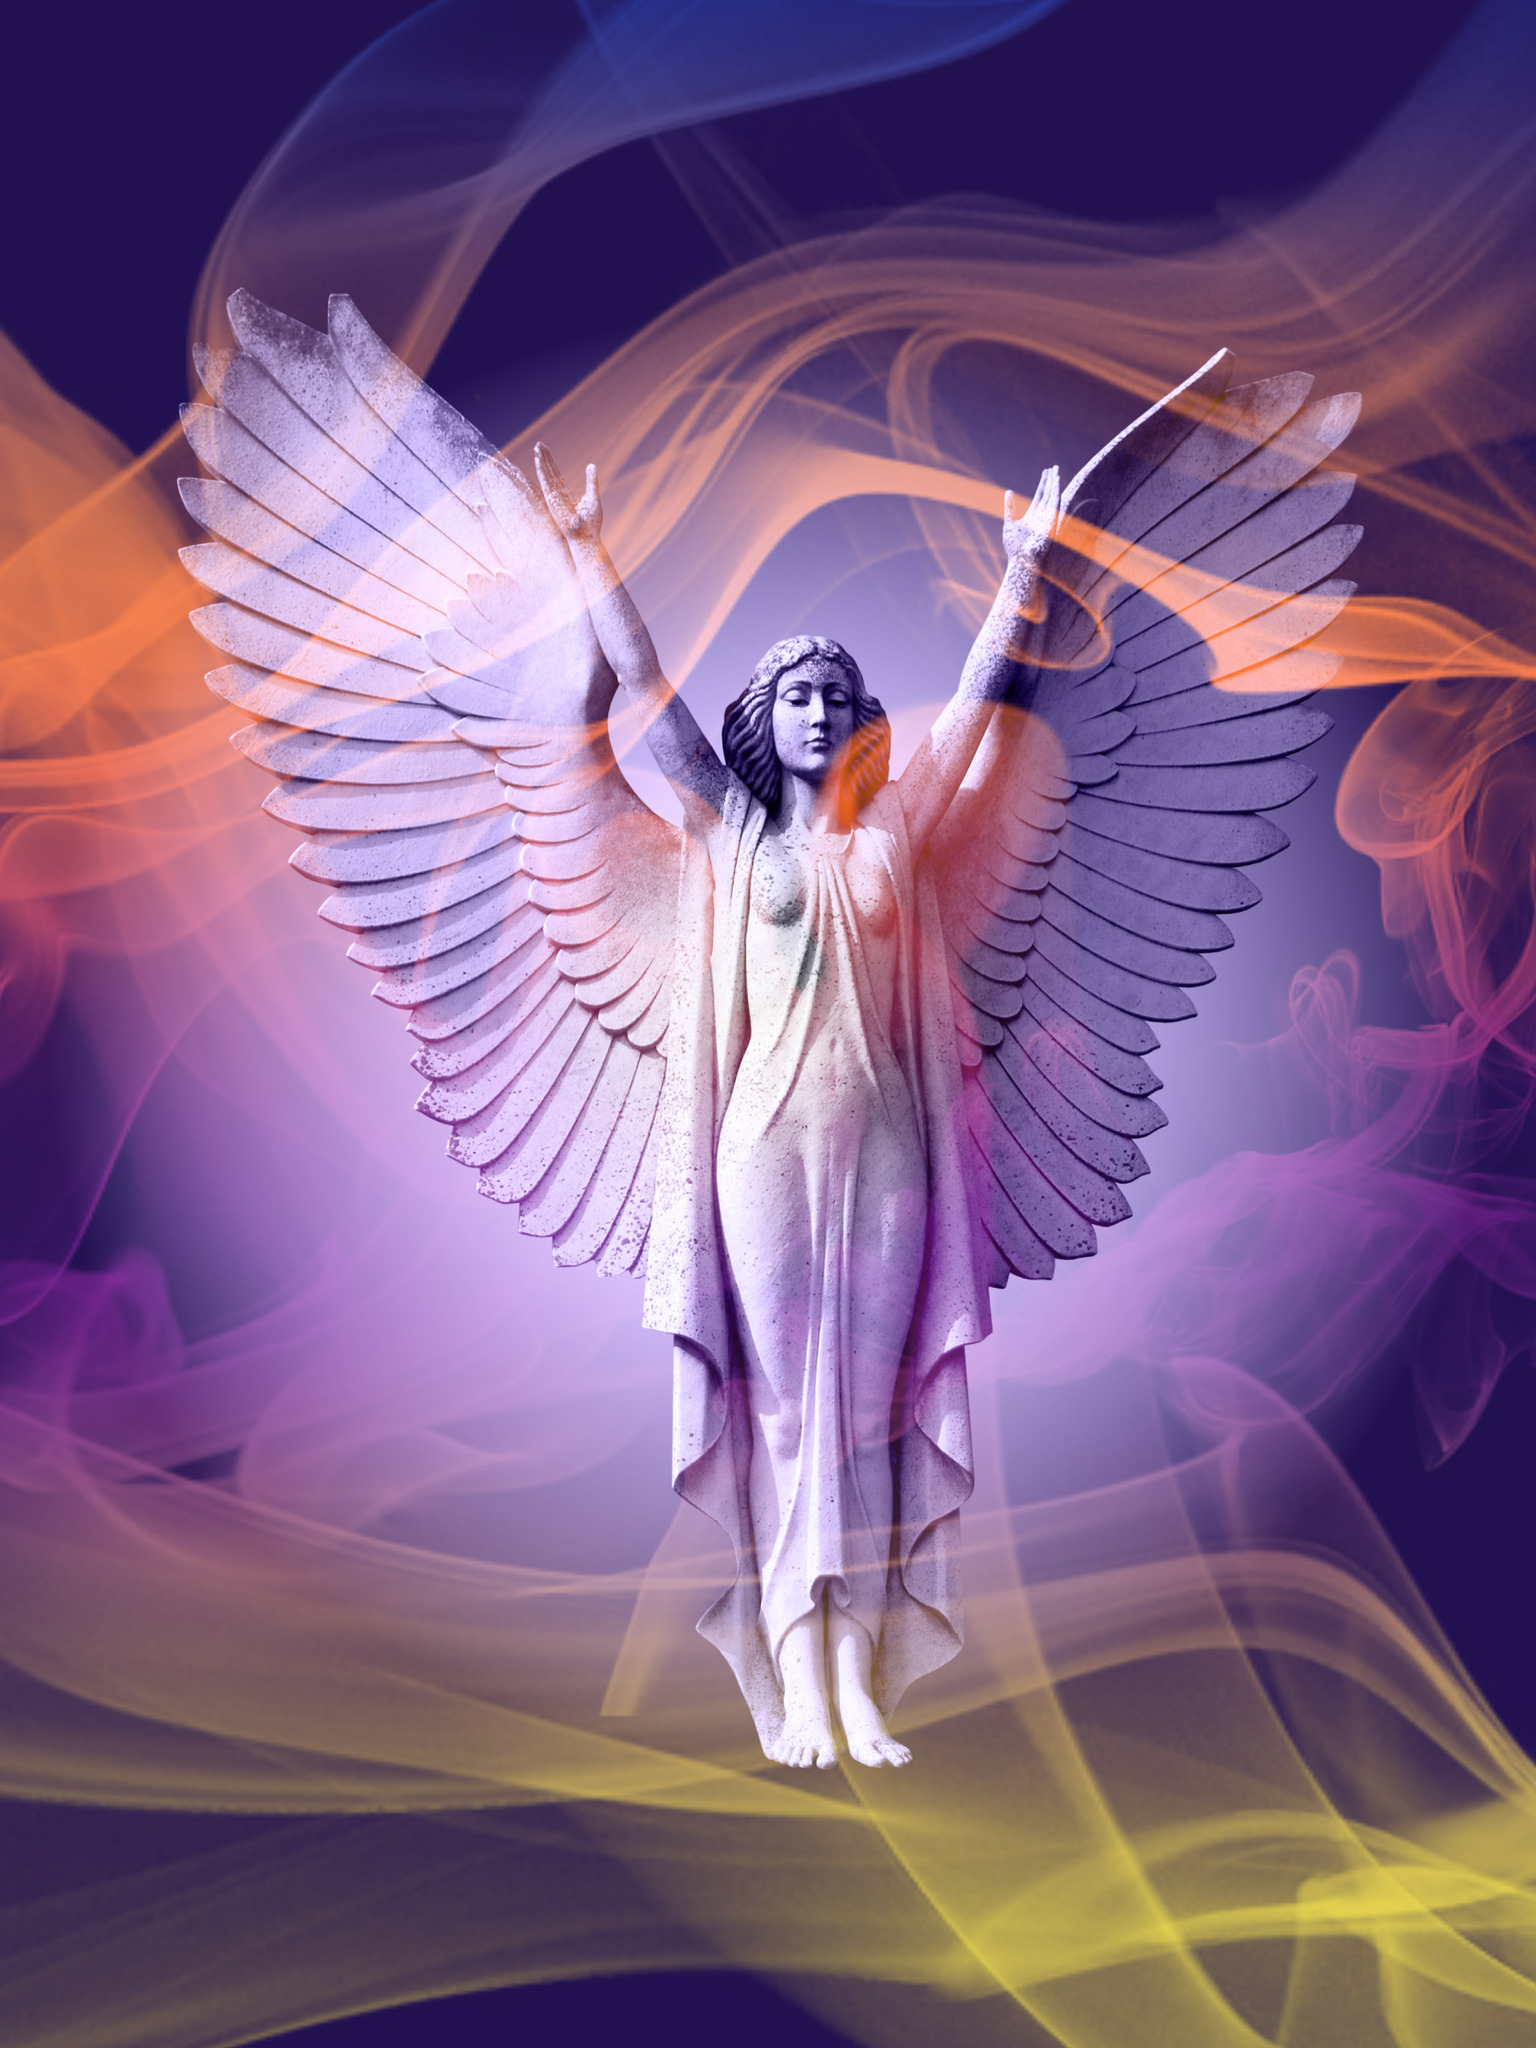 Graphic Art "We all have our guardian angels"